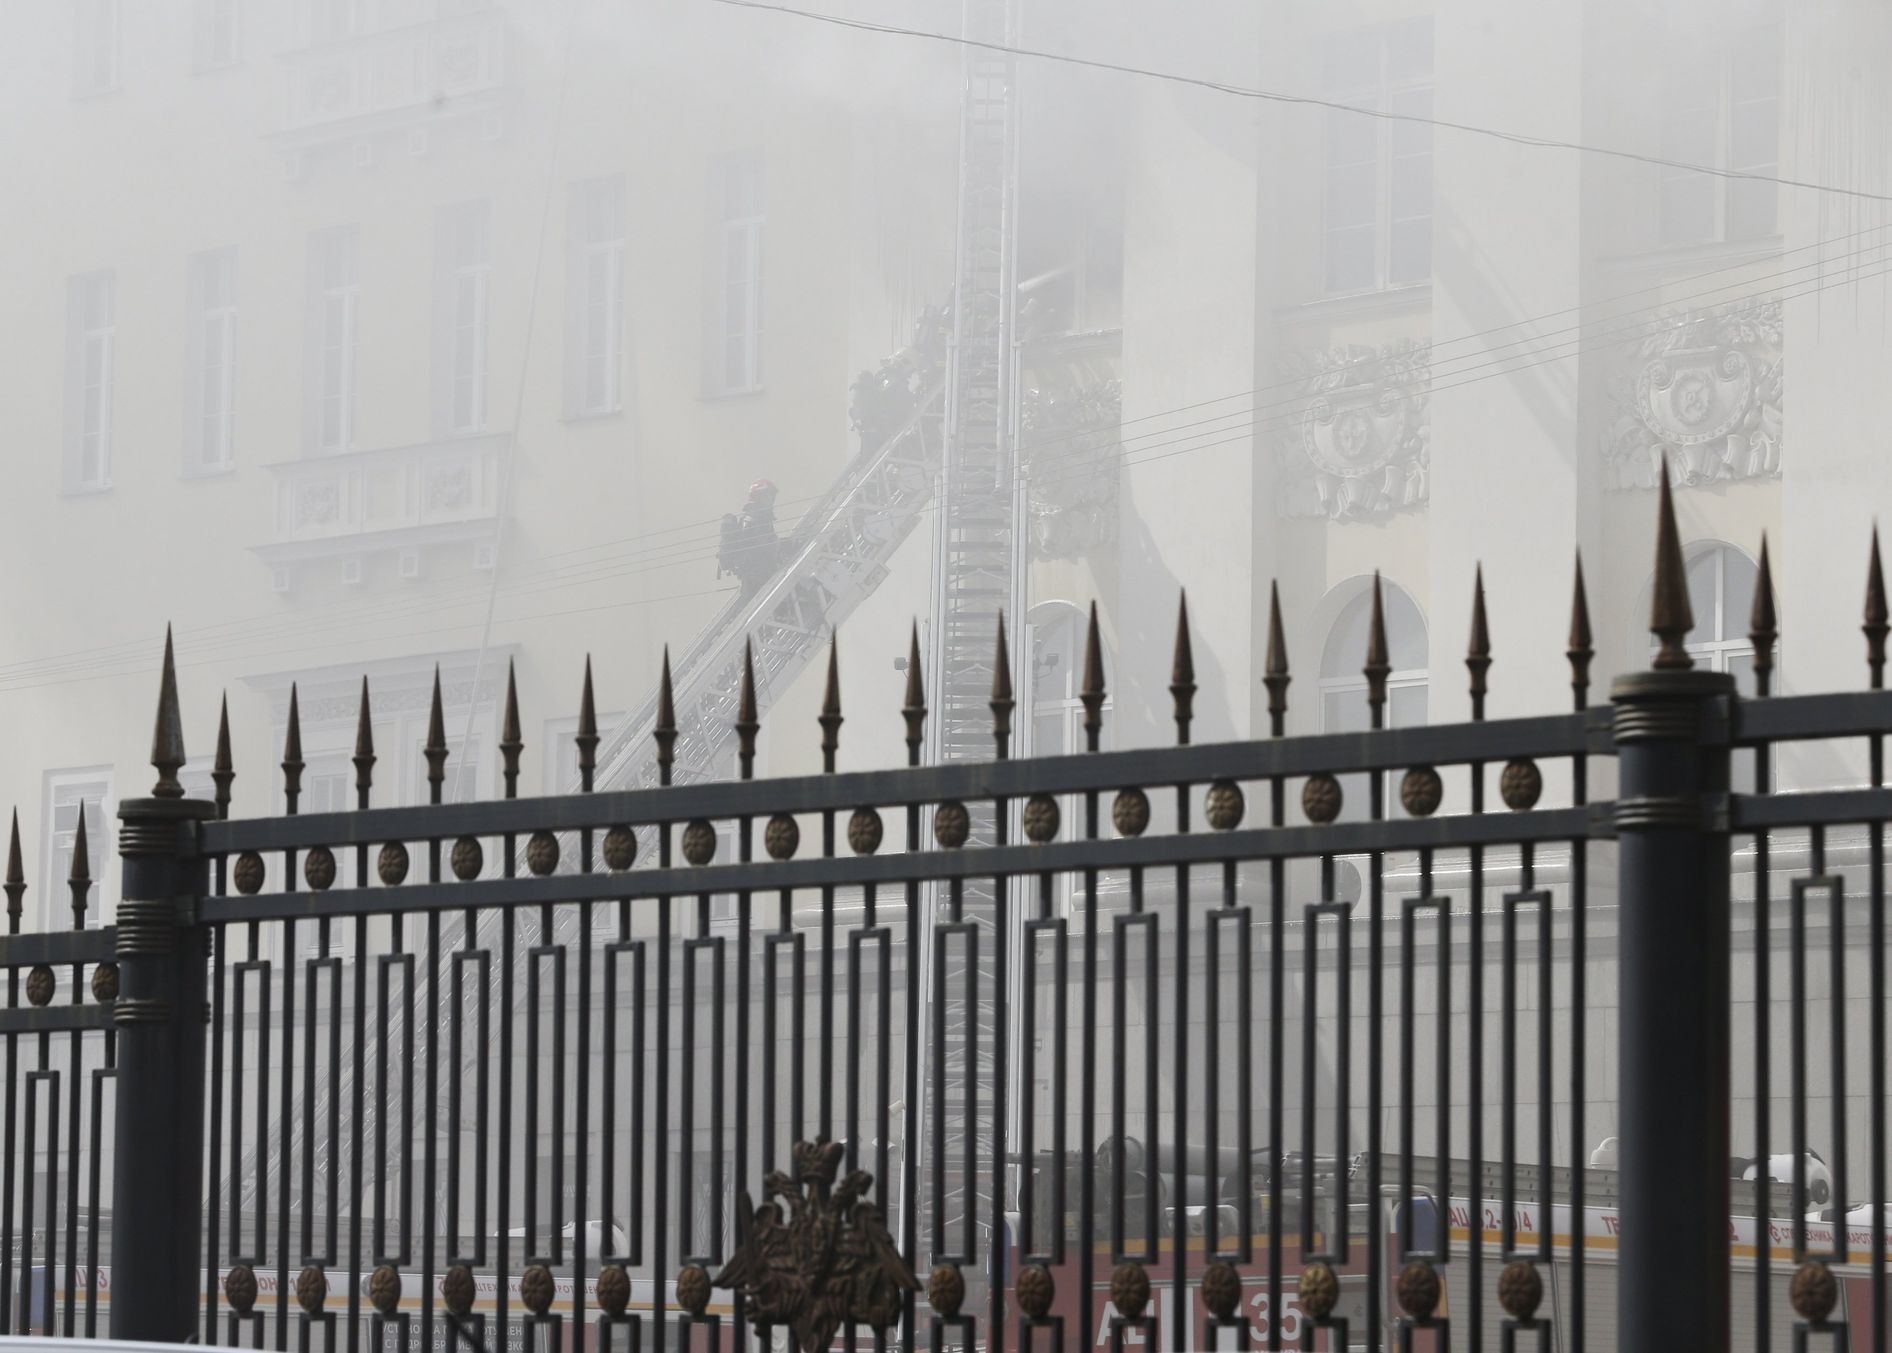 Rusko požár ministerstva obrany Firefighters work to extinguish fire at Russian Defence Ministry's building in central Moscow